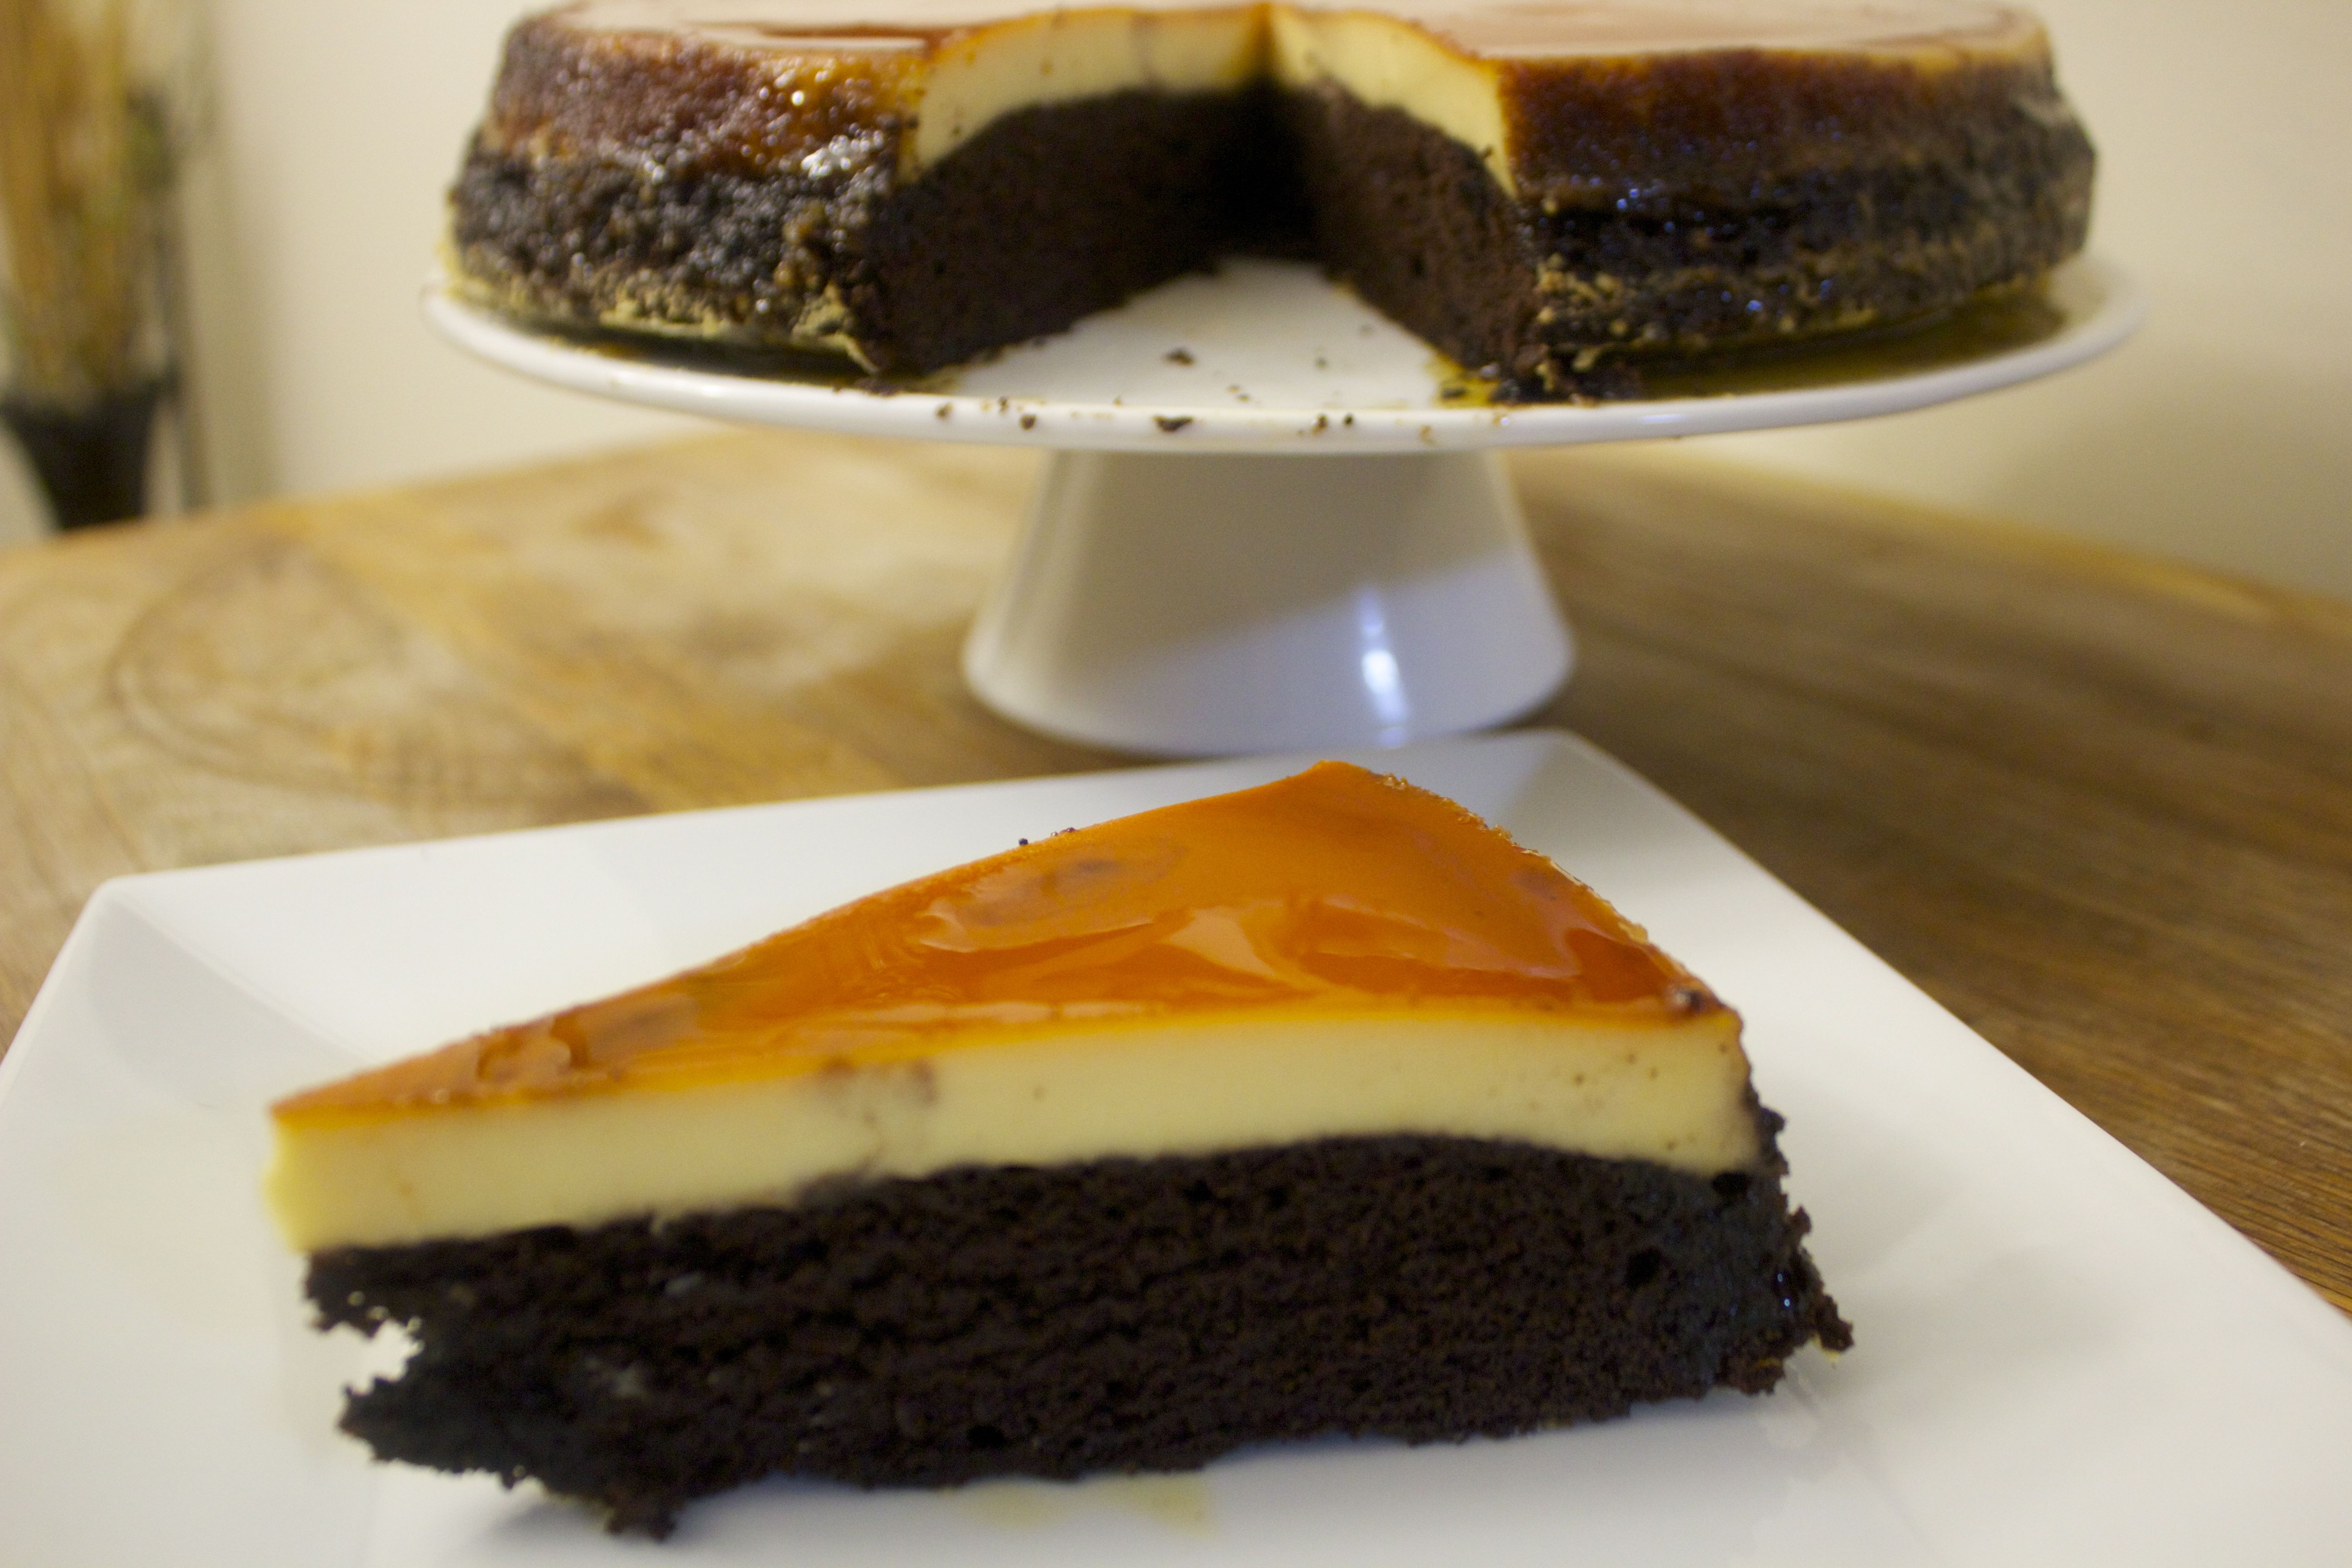 Nice healthy slice of flan with the glaze on top.